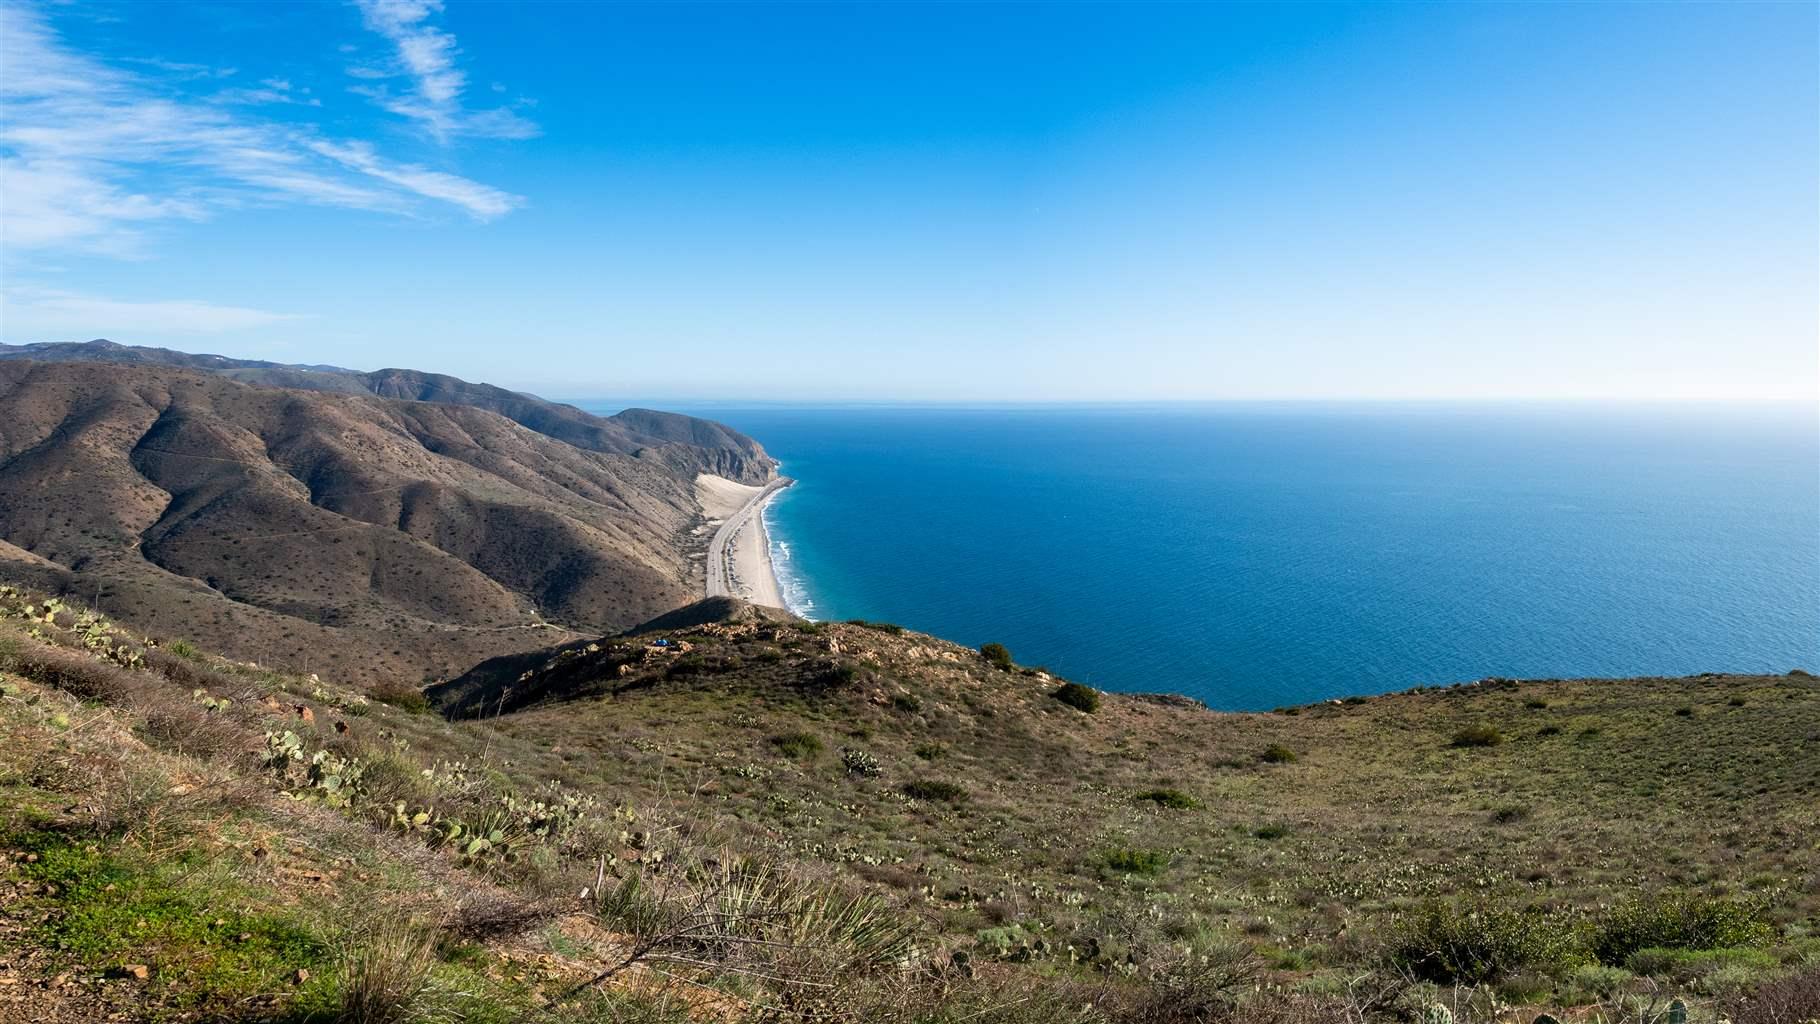 View of Pacific Ocean and Pacific Coast Highway, Highway One, from Chumash and Mugu Peak trail, Point Mugu State Park, Ventura County, California, USA. Jennifer Wan, iStock.